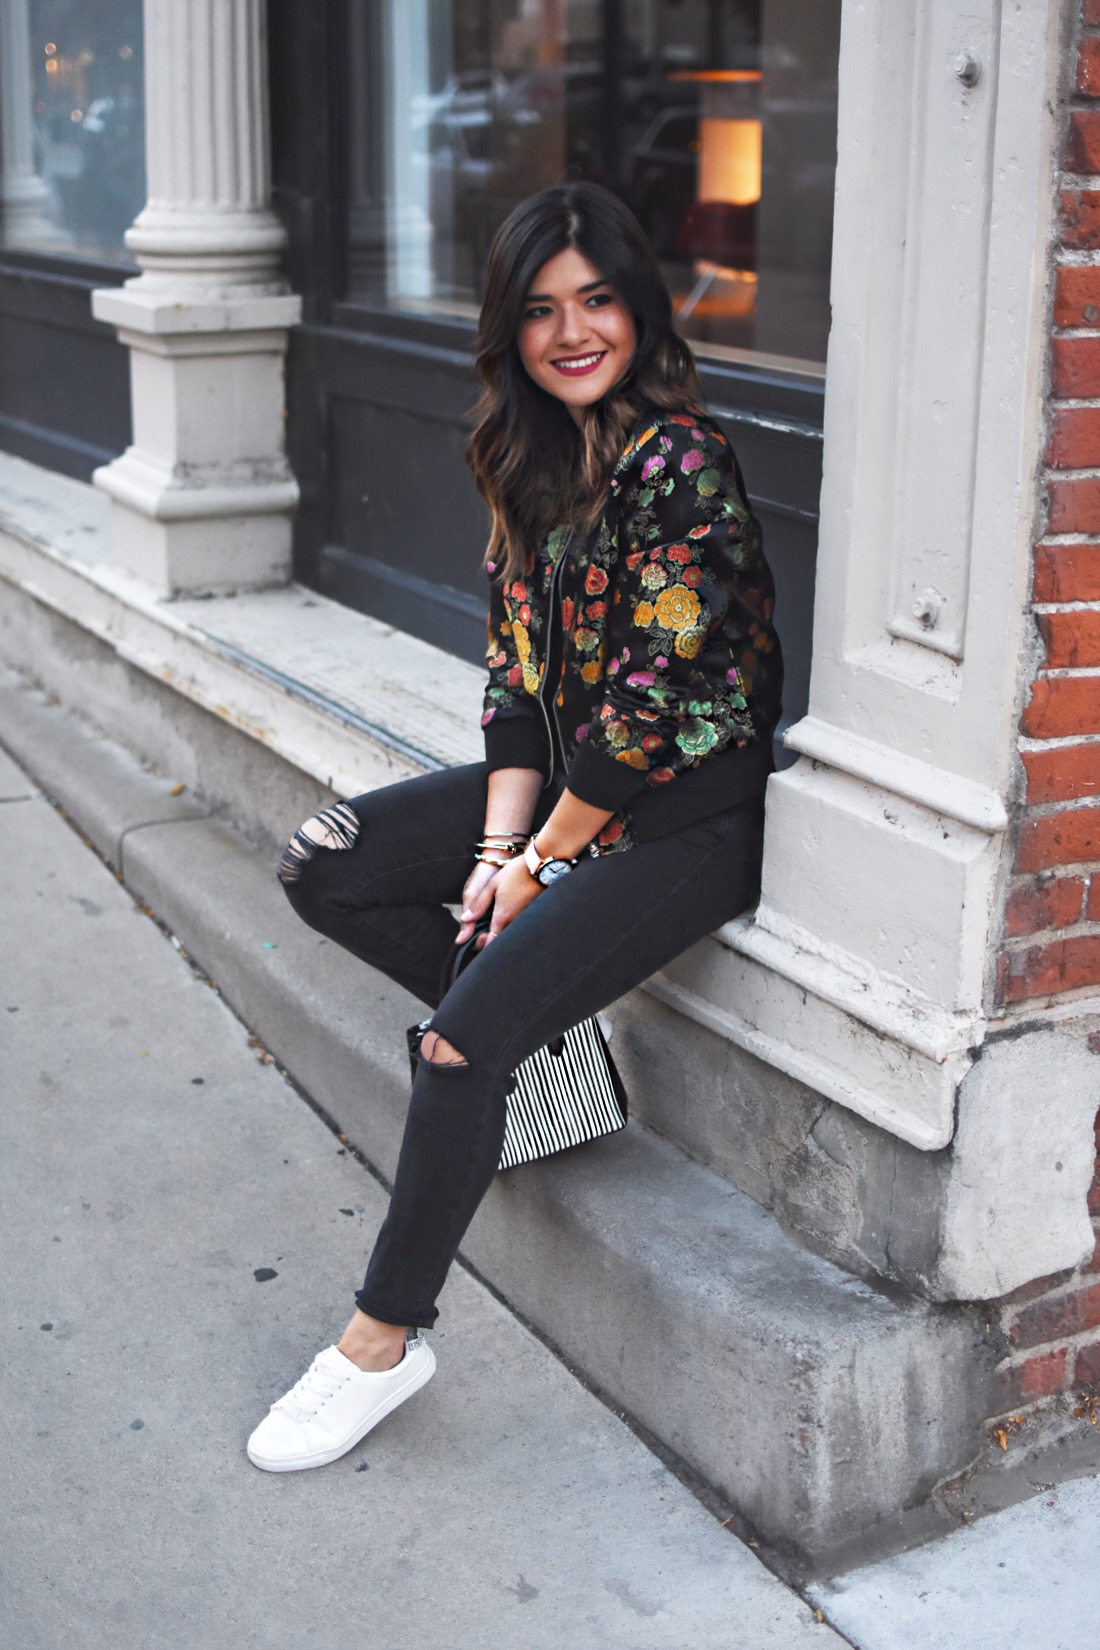 Carolina Hellal of Chic Talk wearing a VIPme floral bomber jacket, Madewell dark gray ripped jeans, h&m white sneakers, and Ralph Lauren striped bag